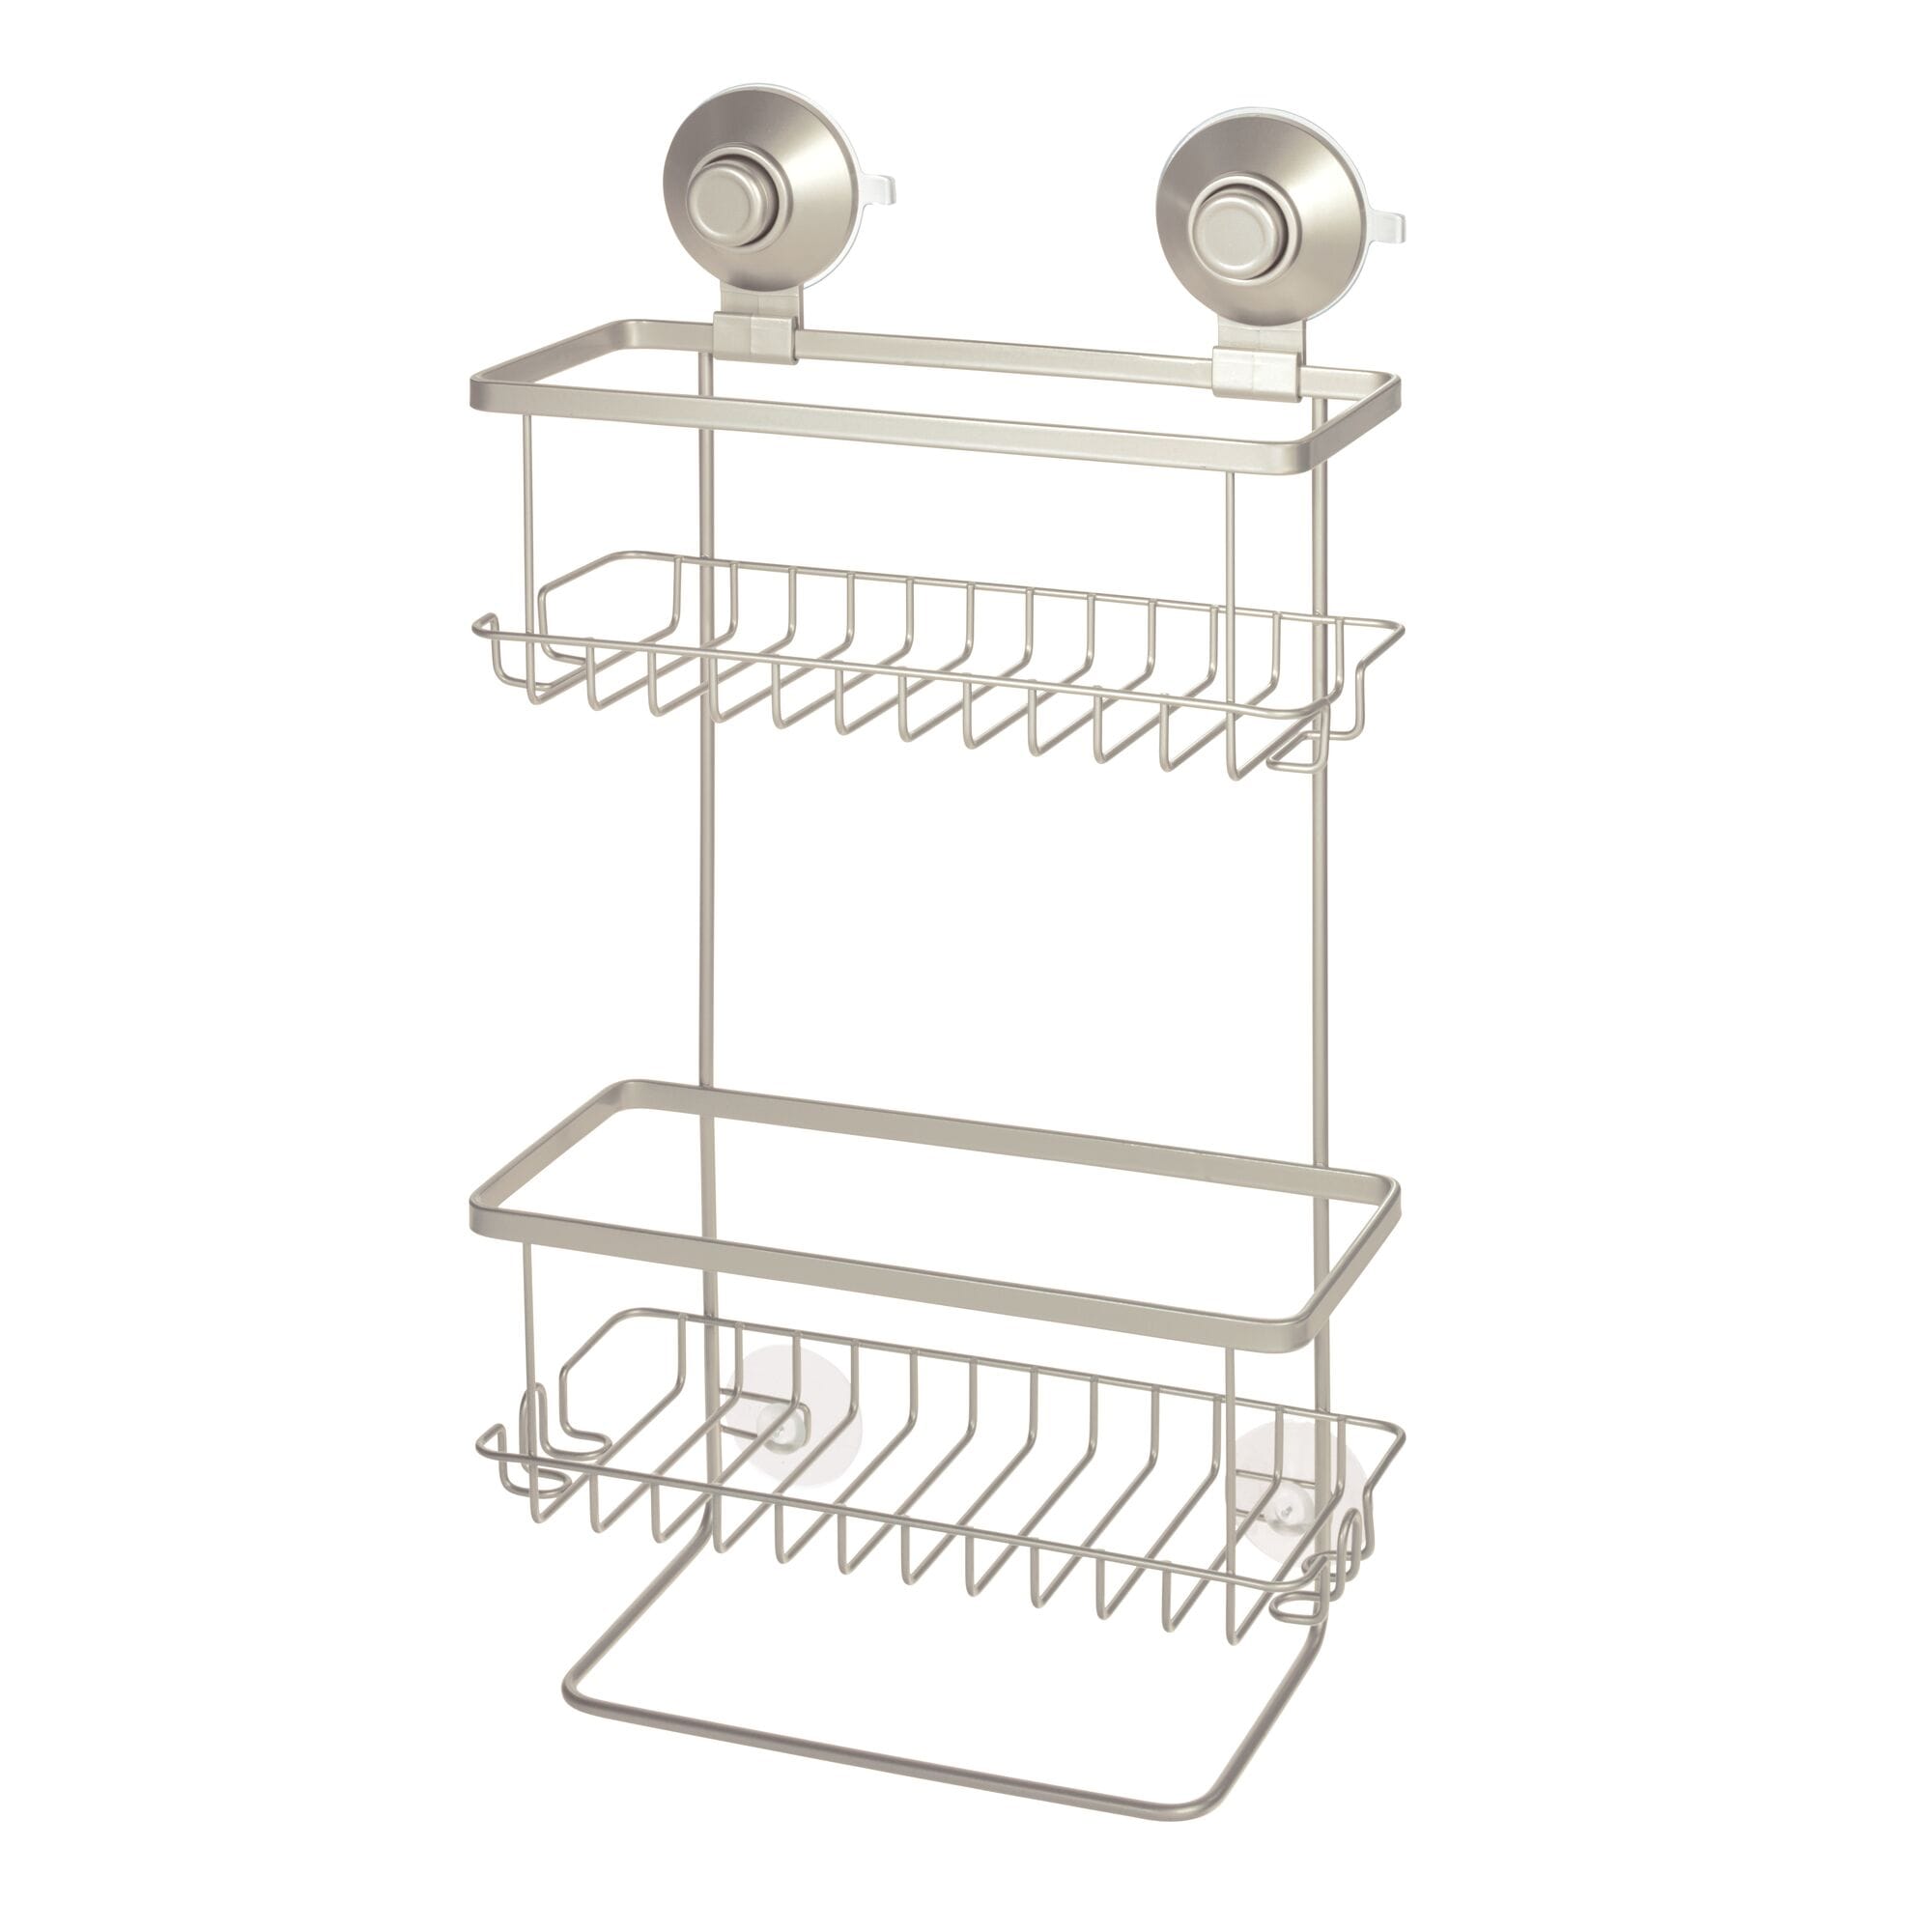 iDesign Nickel Steel Suction Cup Hanging Shower Caddy 9.1-in x